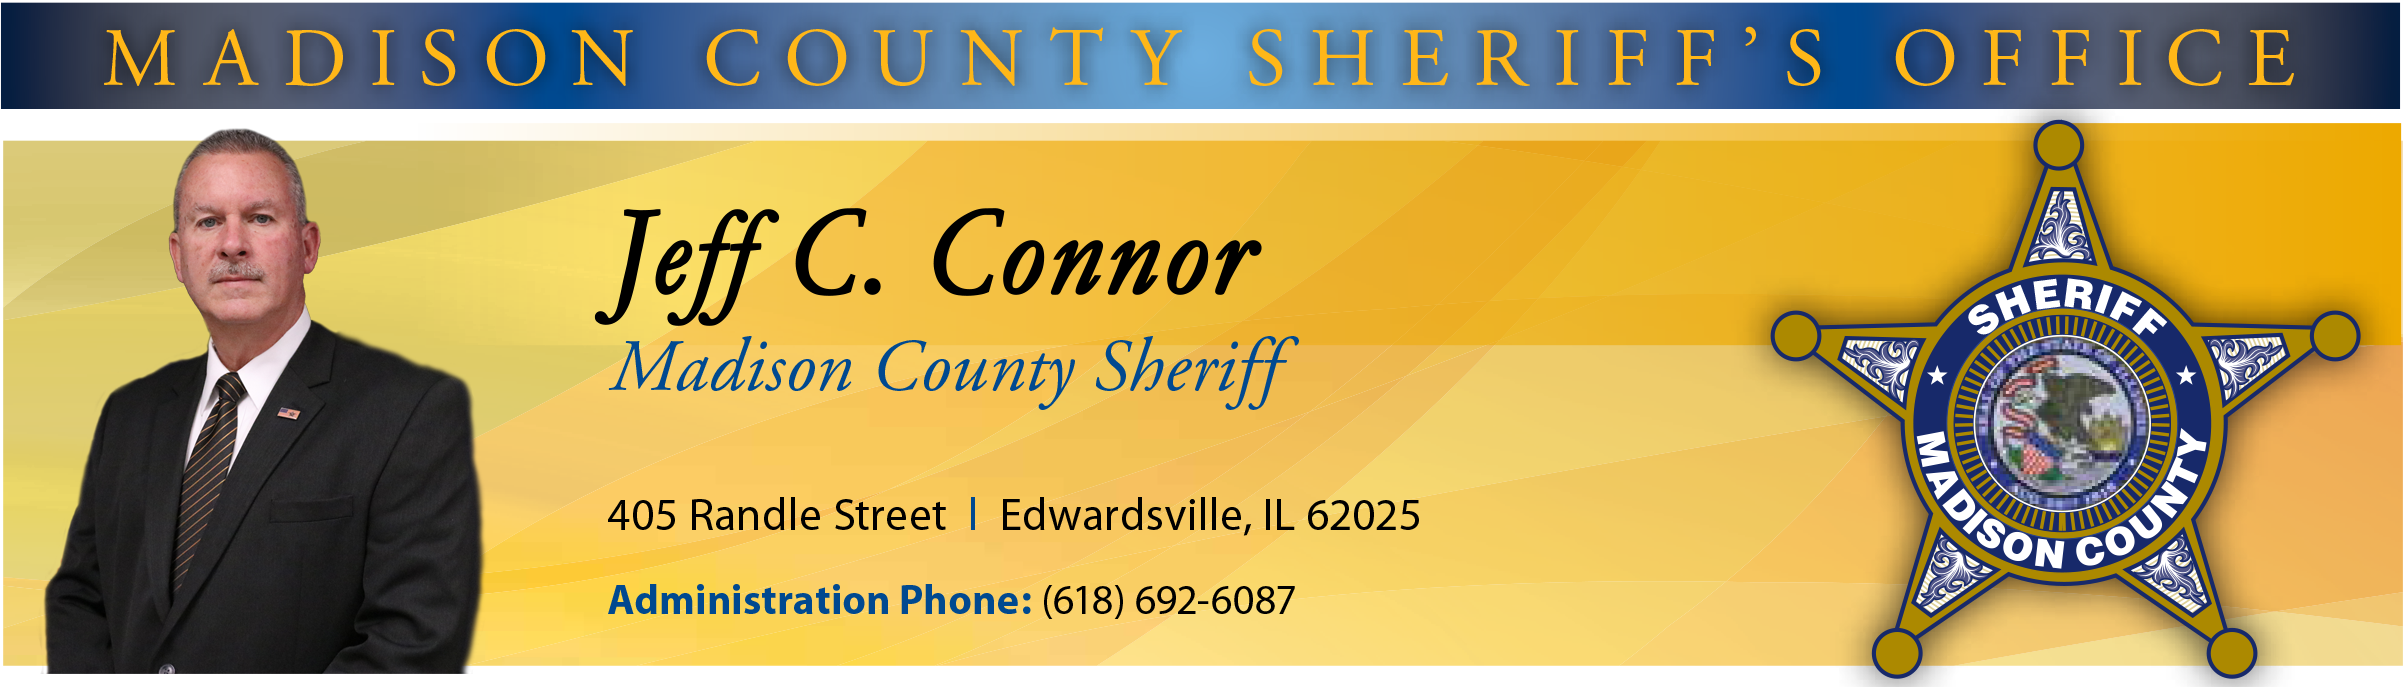 Sheriff Home Banner